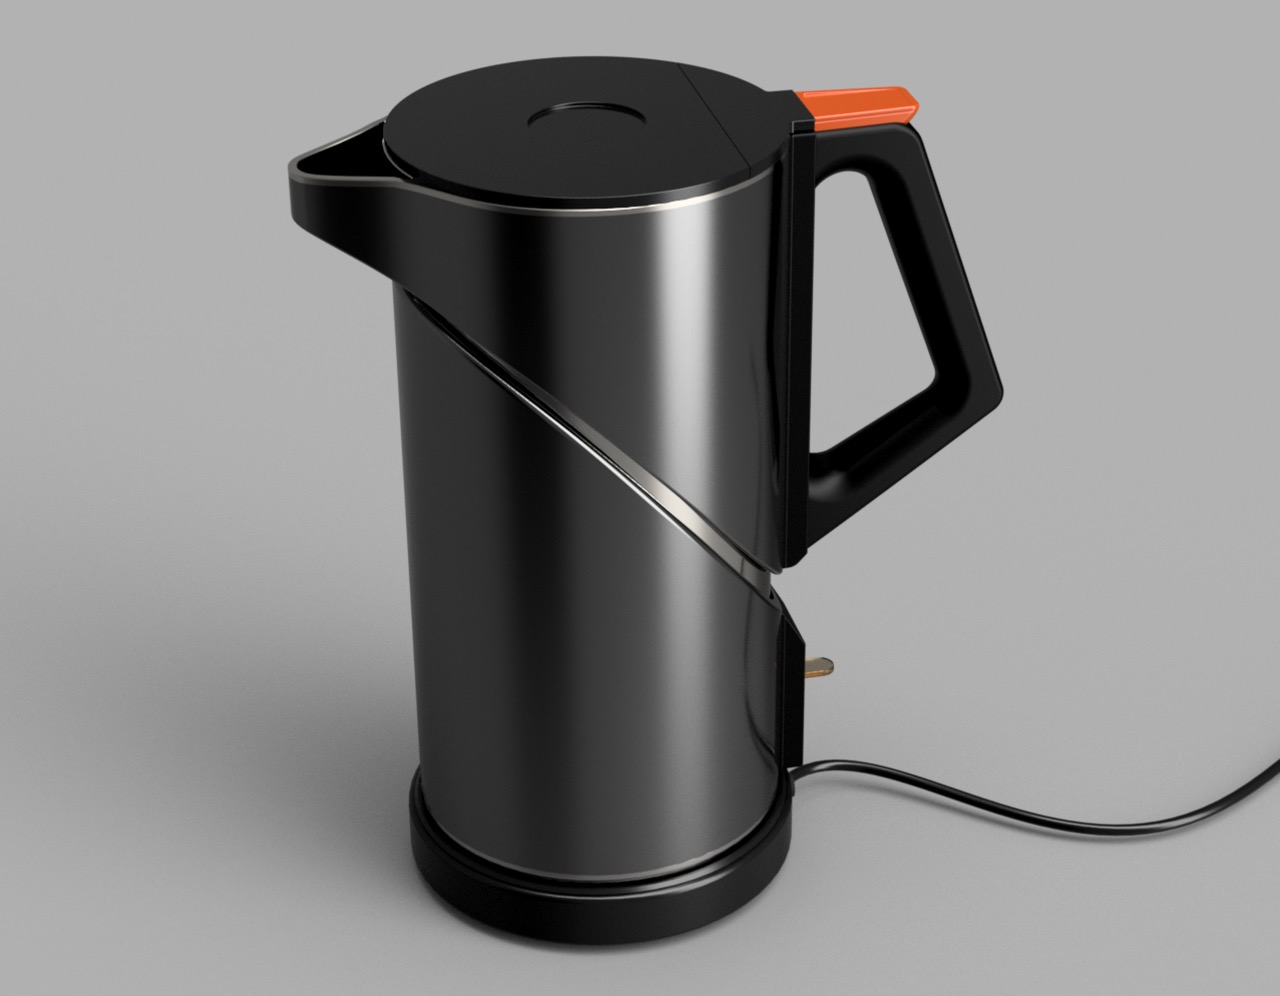 Kettle Design | Learn Squared